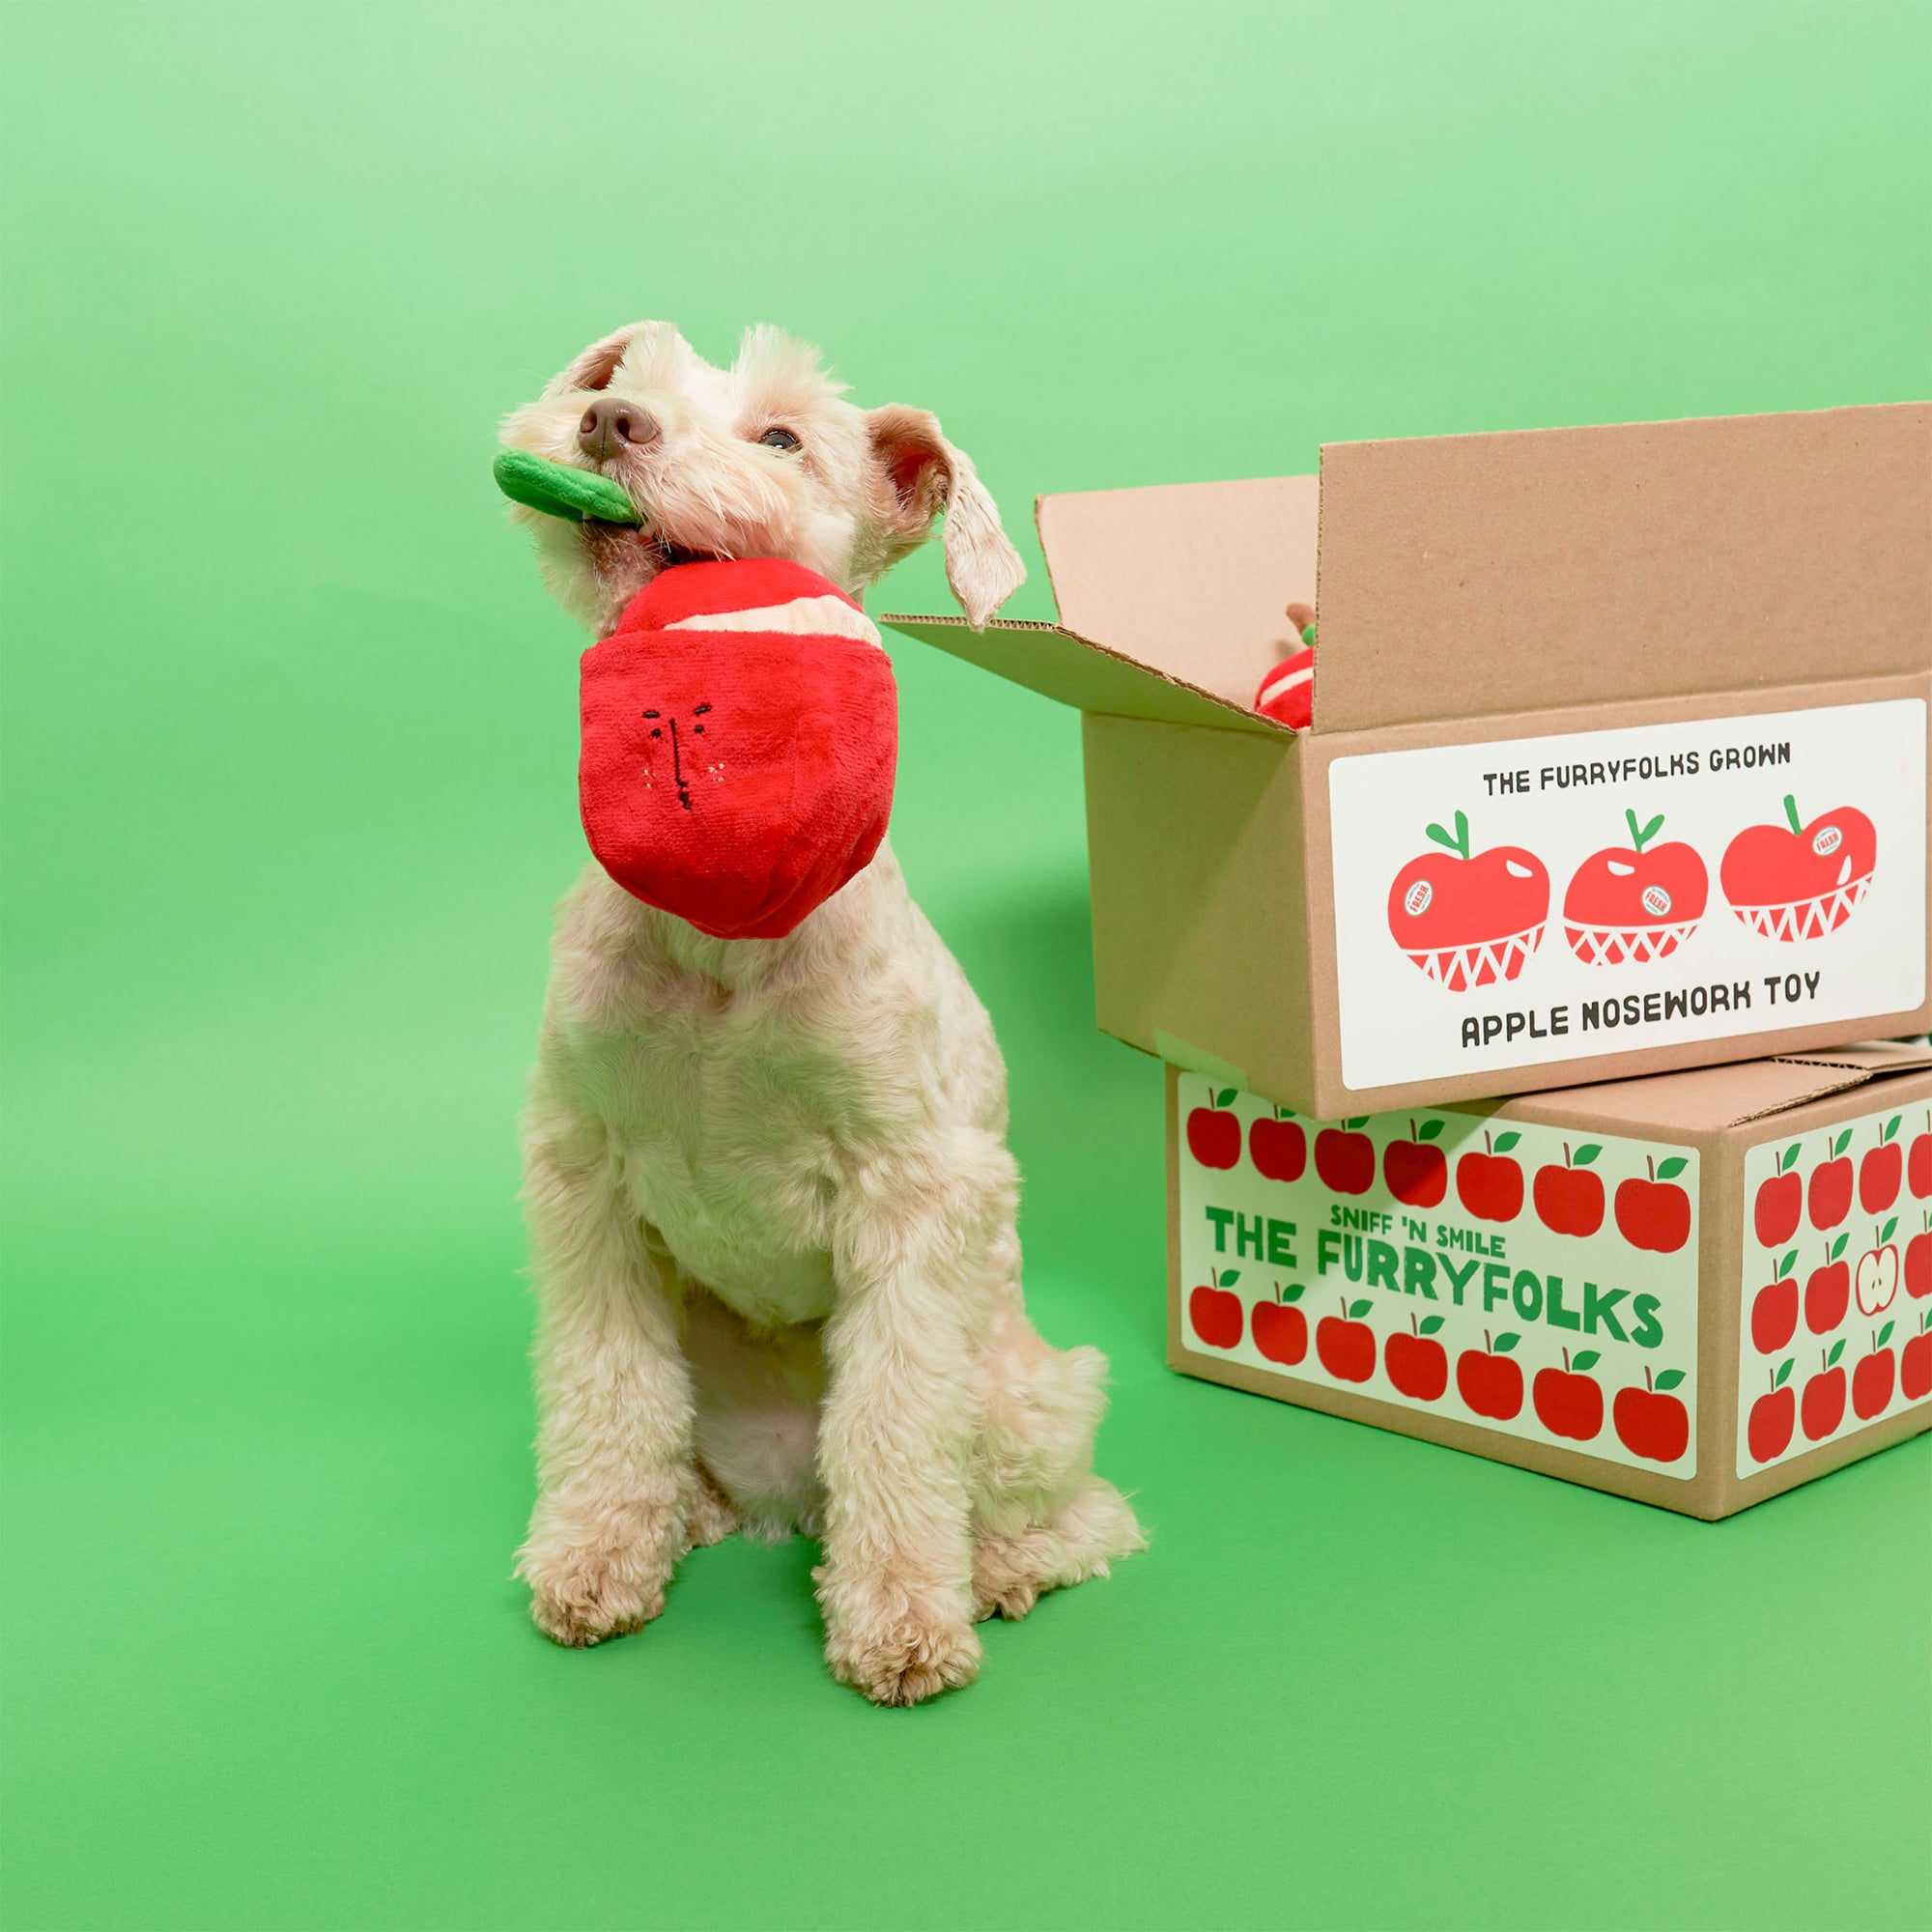 A white dog sitting on a green background, playfully biting a red apple-shaped dog toy with a green leaf, next to a cardboard box labeled "The Furryfolks Grown Apple Nosework Toy".